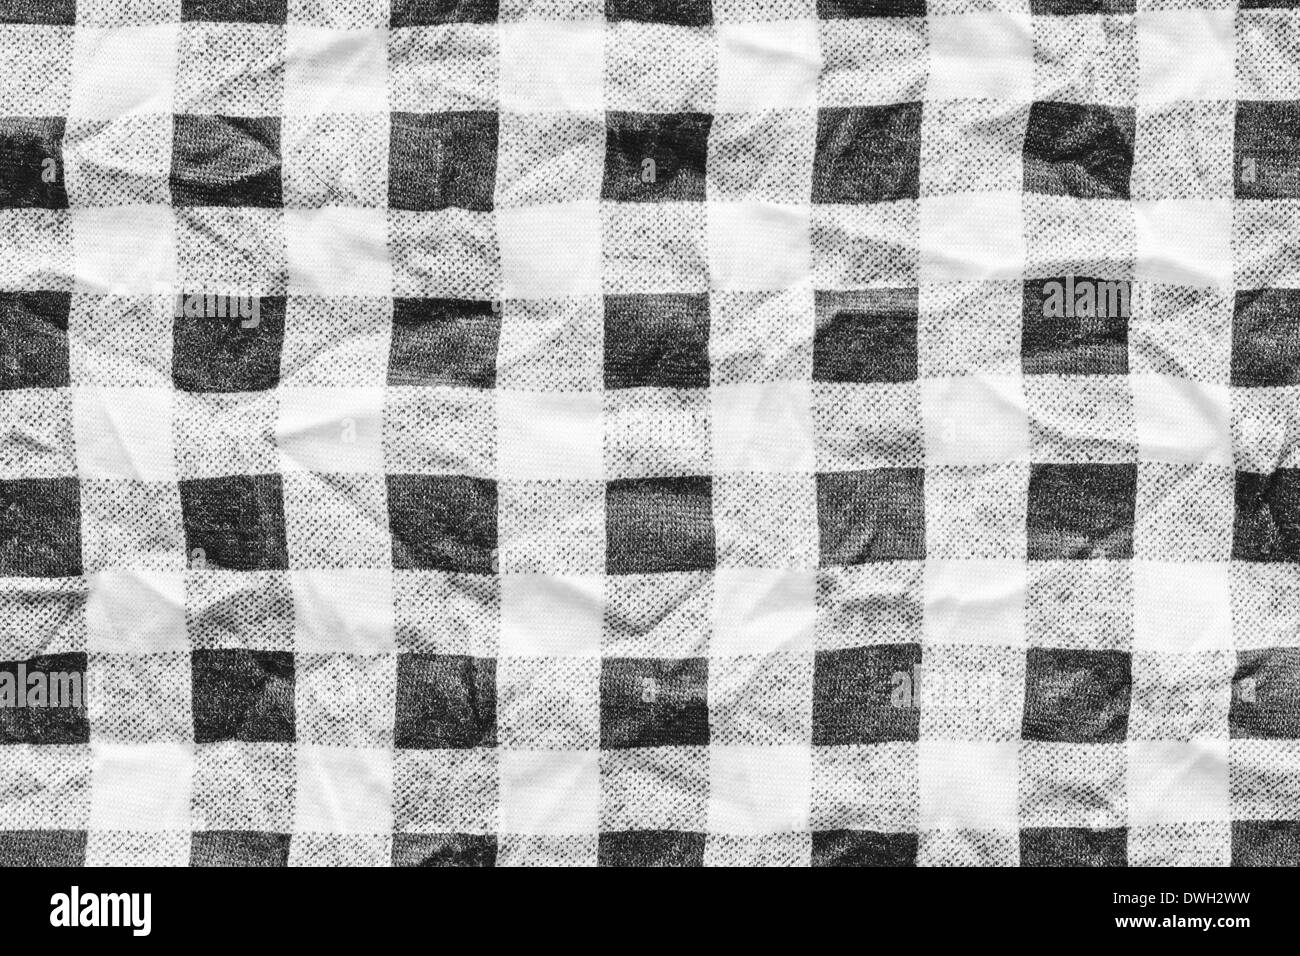 Crumpled black and white checked cloth as a background Stock Photo